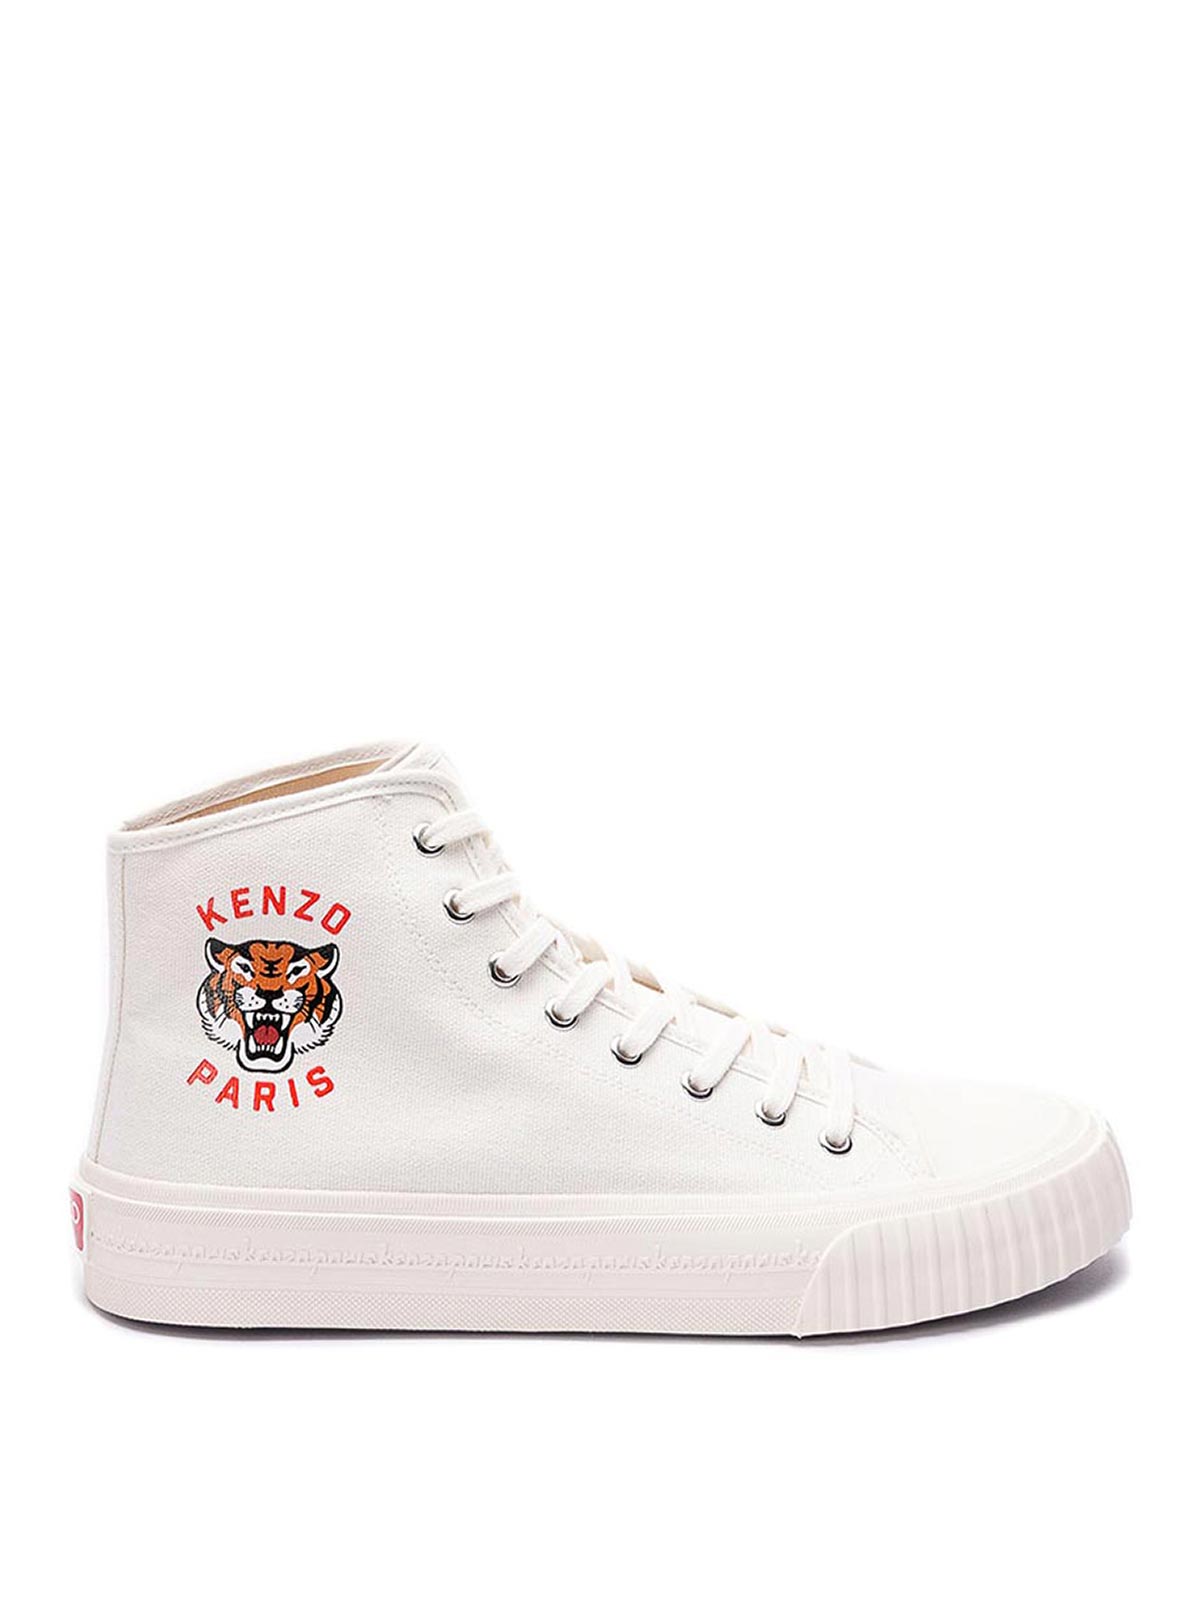 Kenzo Foxy High Top Sneakers In White